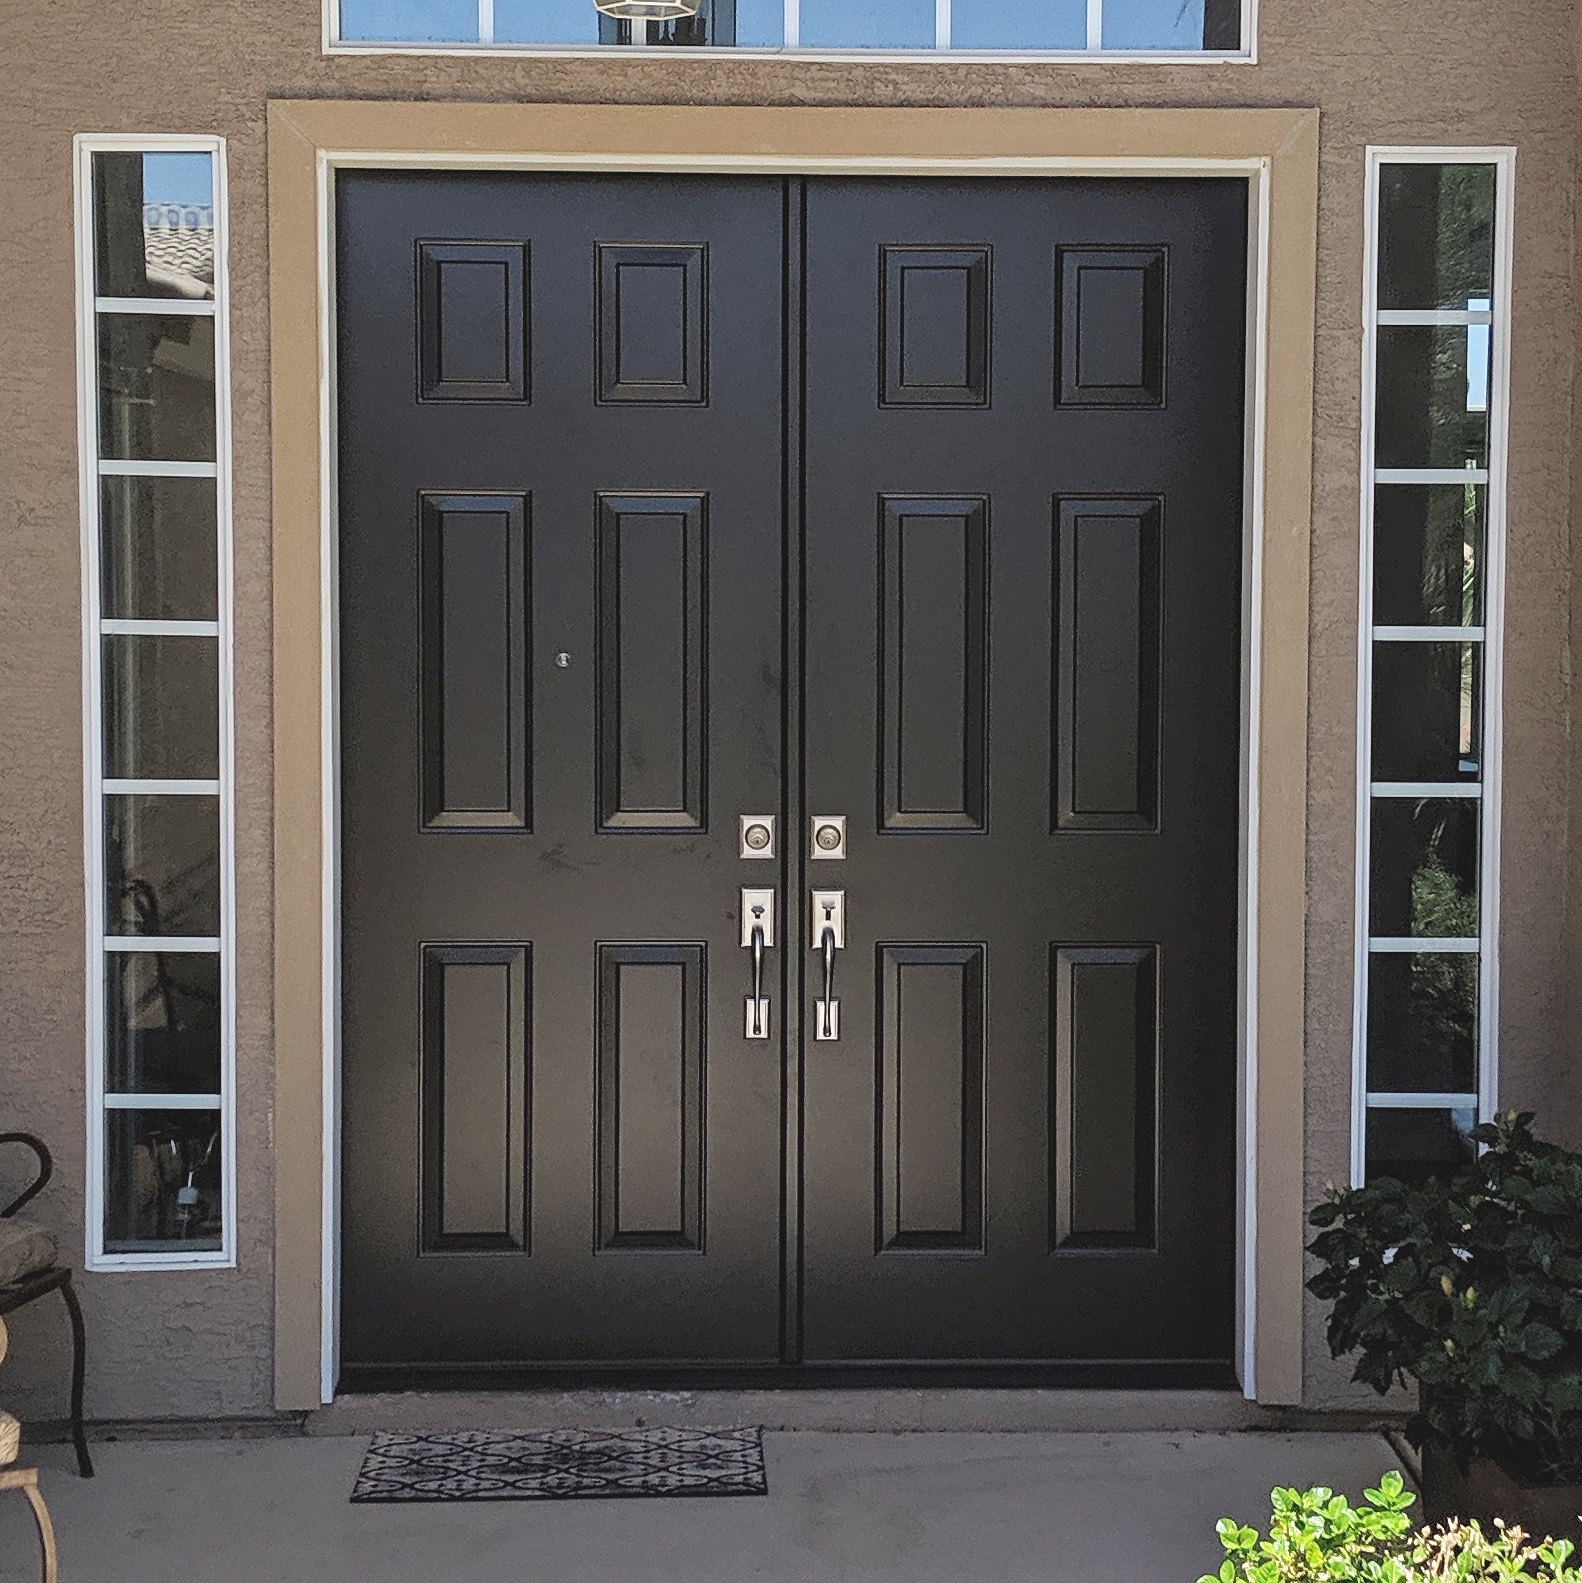 Arizona Window and Door in Scottsdale and Tucson showing front french doors